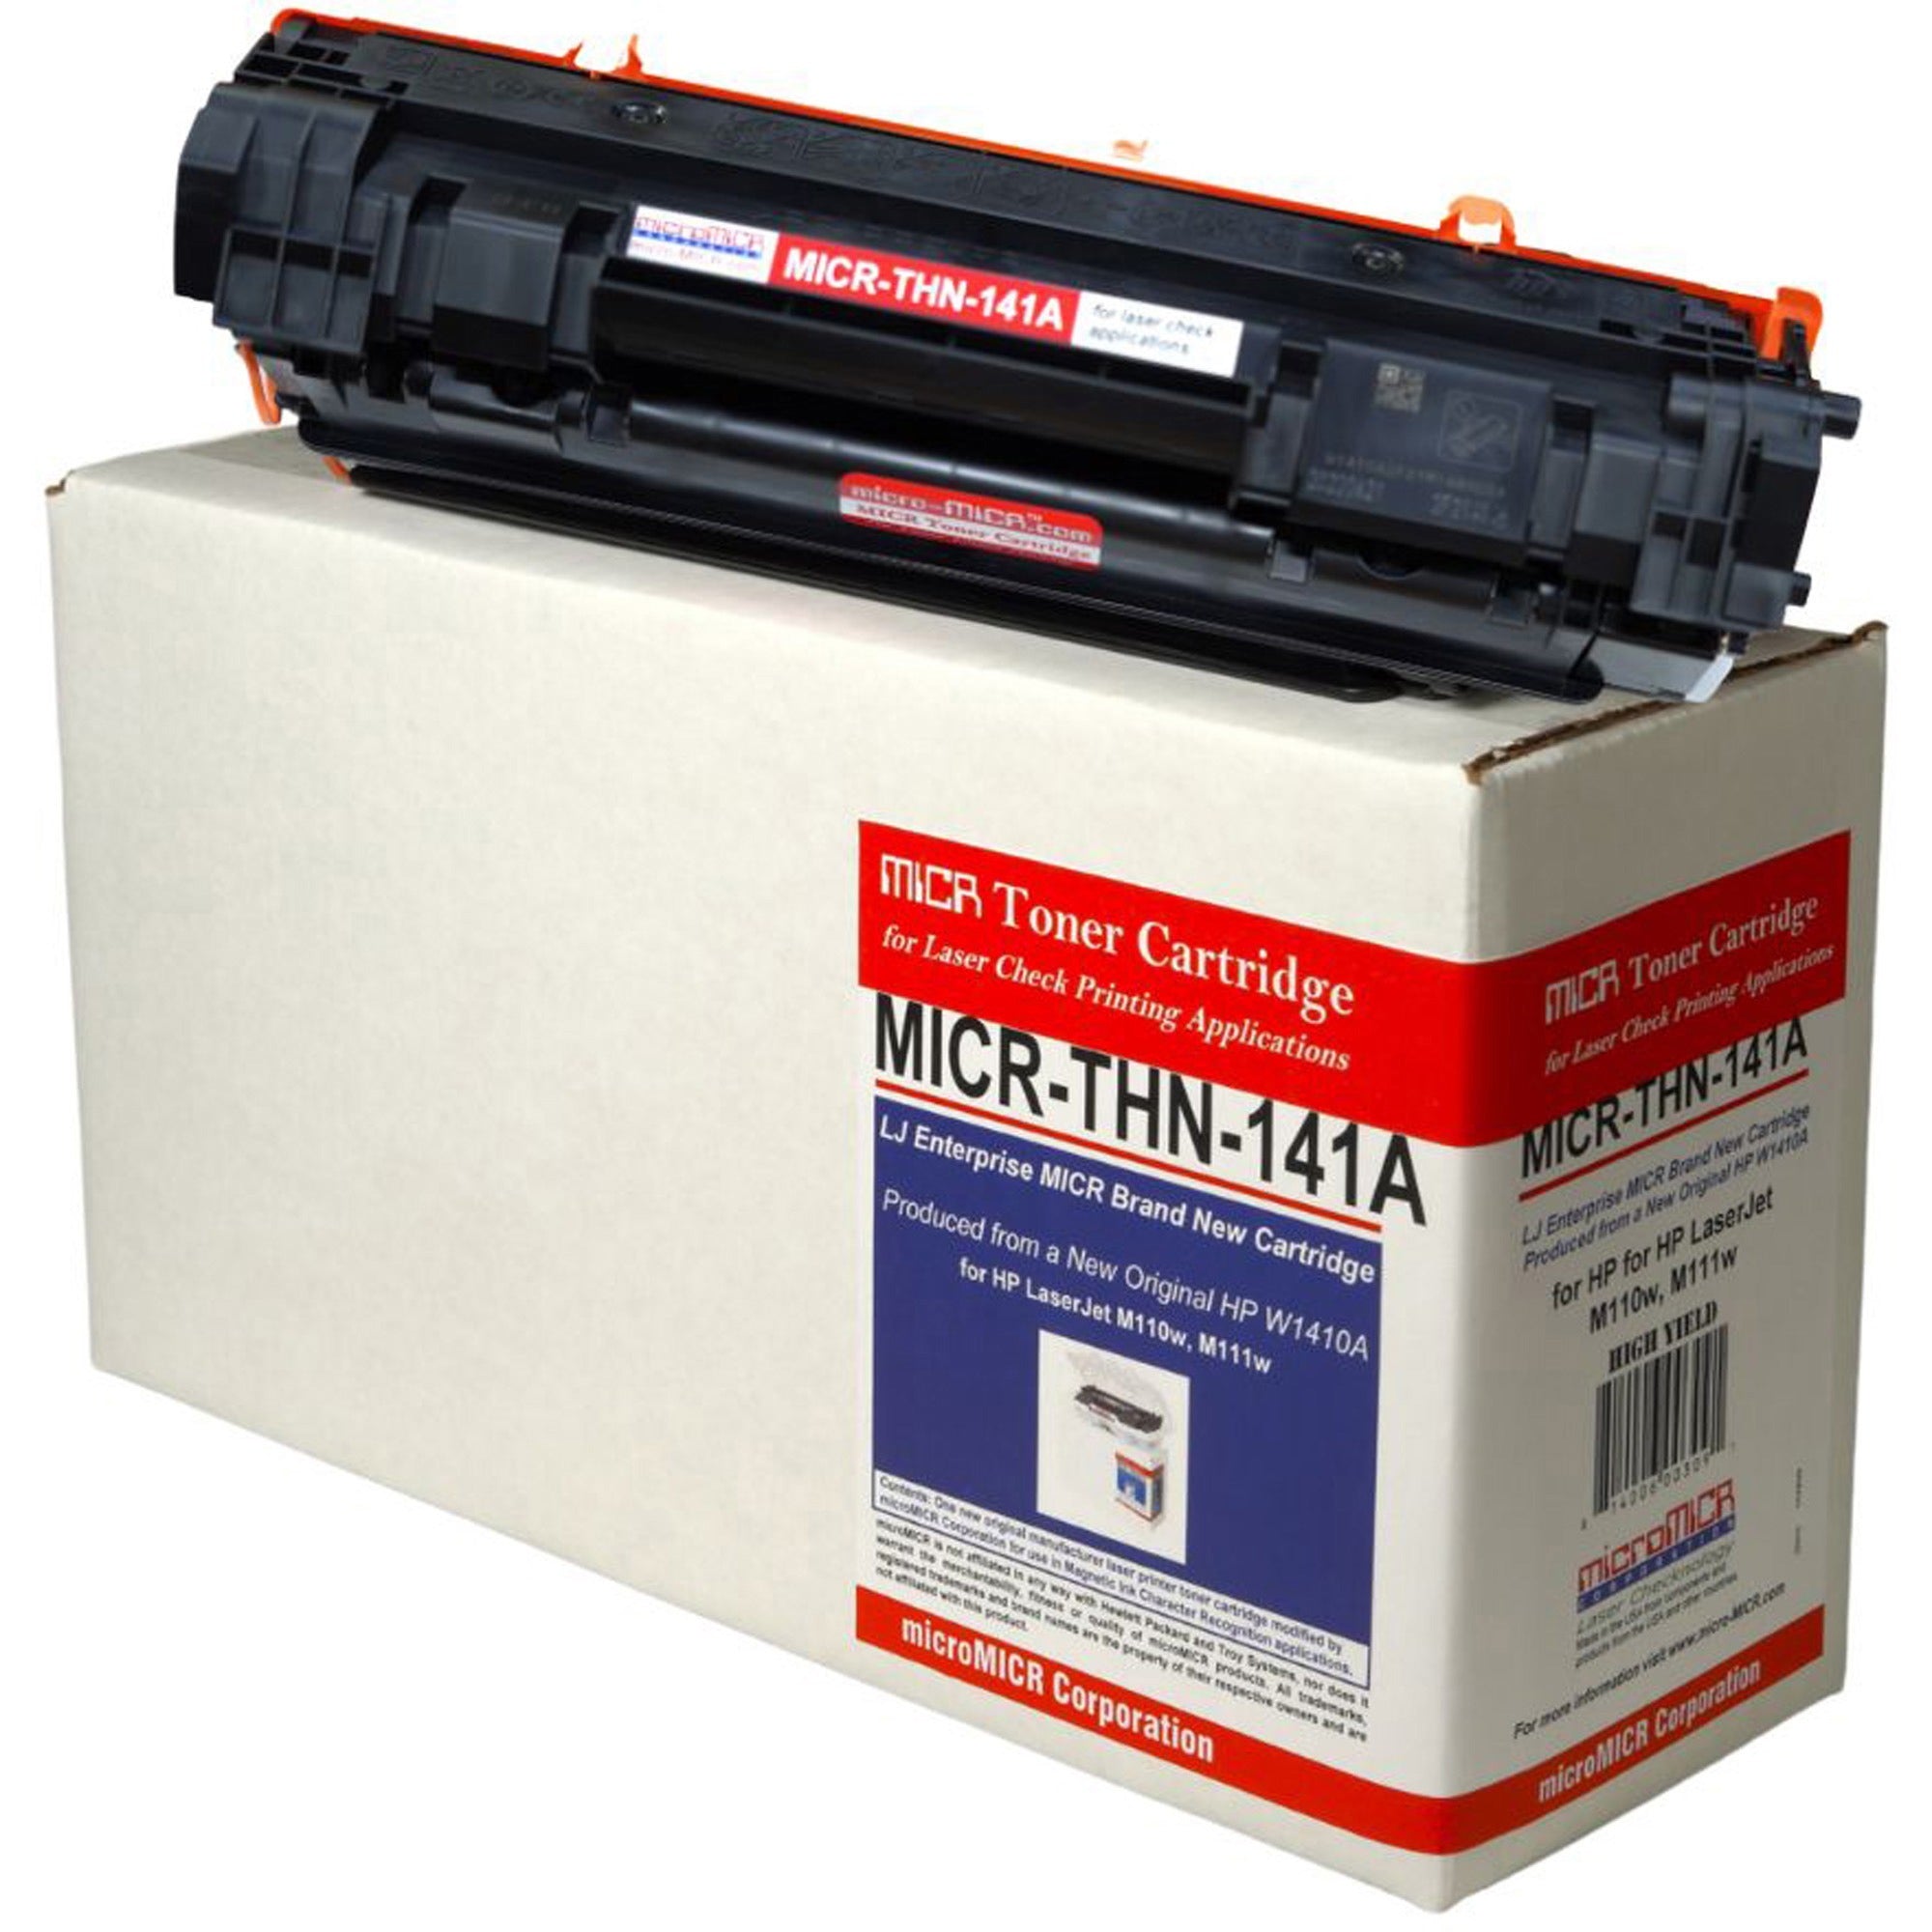 micromicr-micr-standard-yield-laser-toner-cartridge-alternative-for-hp-141a-w1480a-black-1-each-950-pages_mcmmicrthn141a - 1